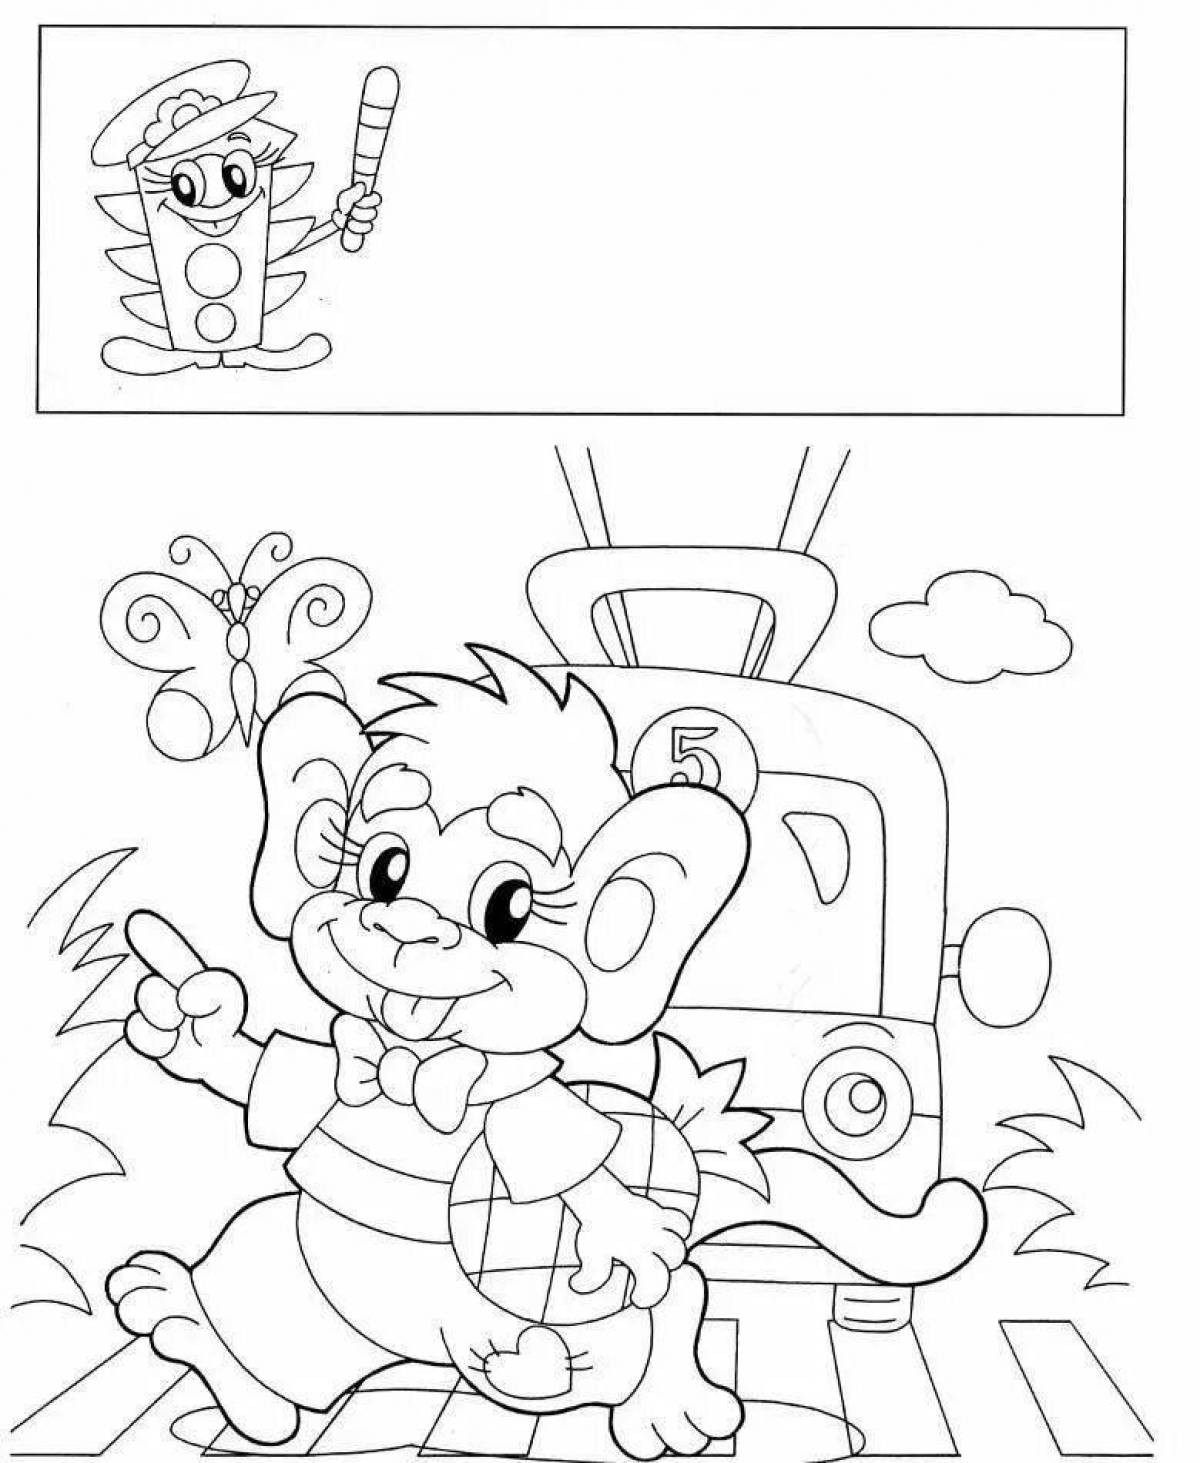 Colorful traffic rules coloring page for 5-6 year olds